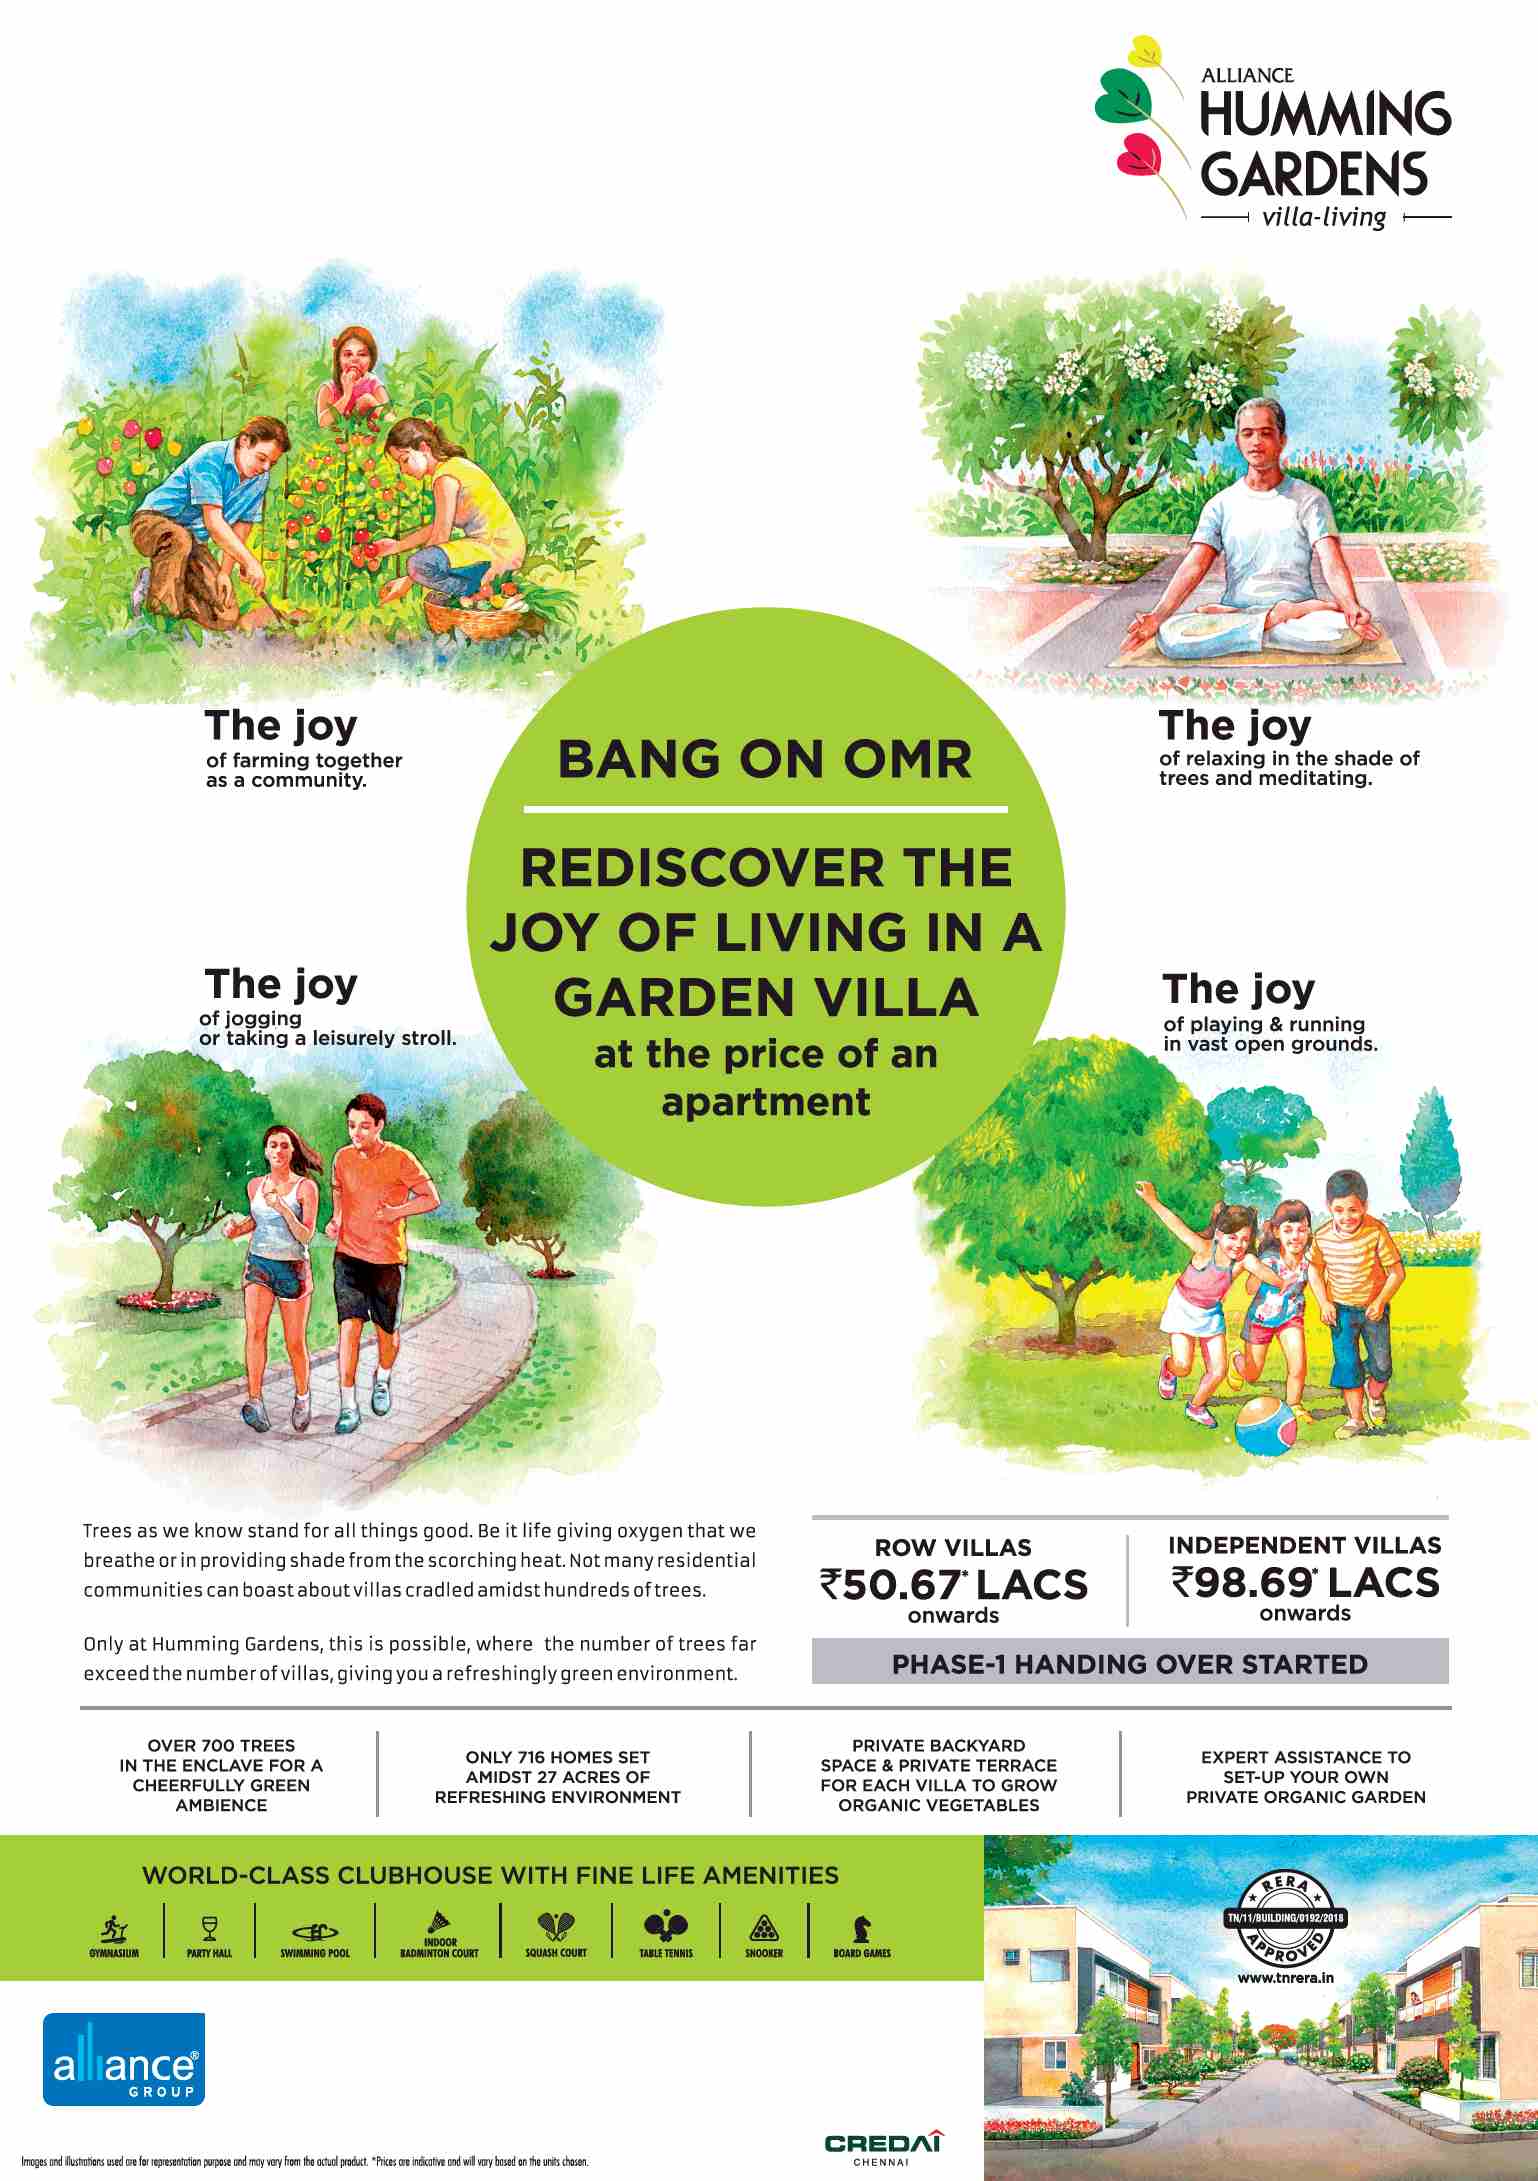 Rediscover the joy of living in a garden villa at Alliance Humming Gardens in Chennai